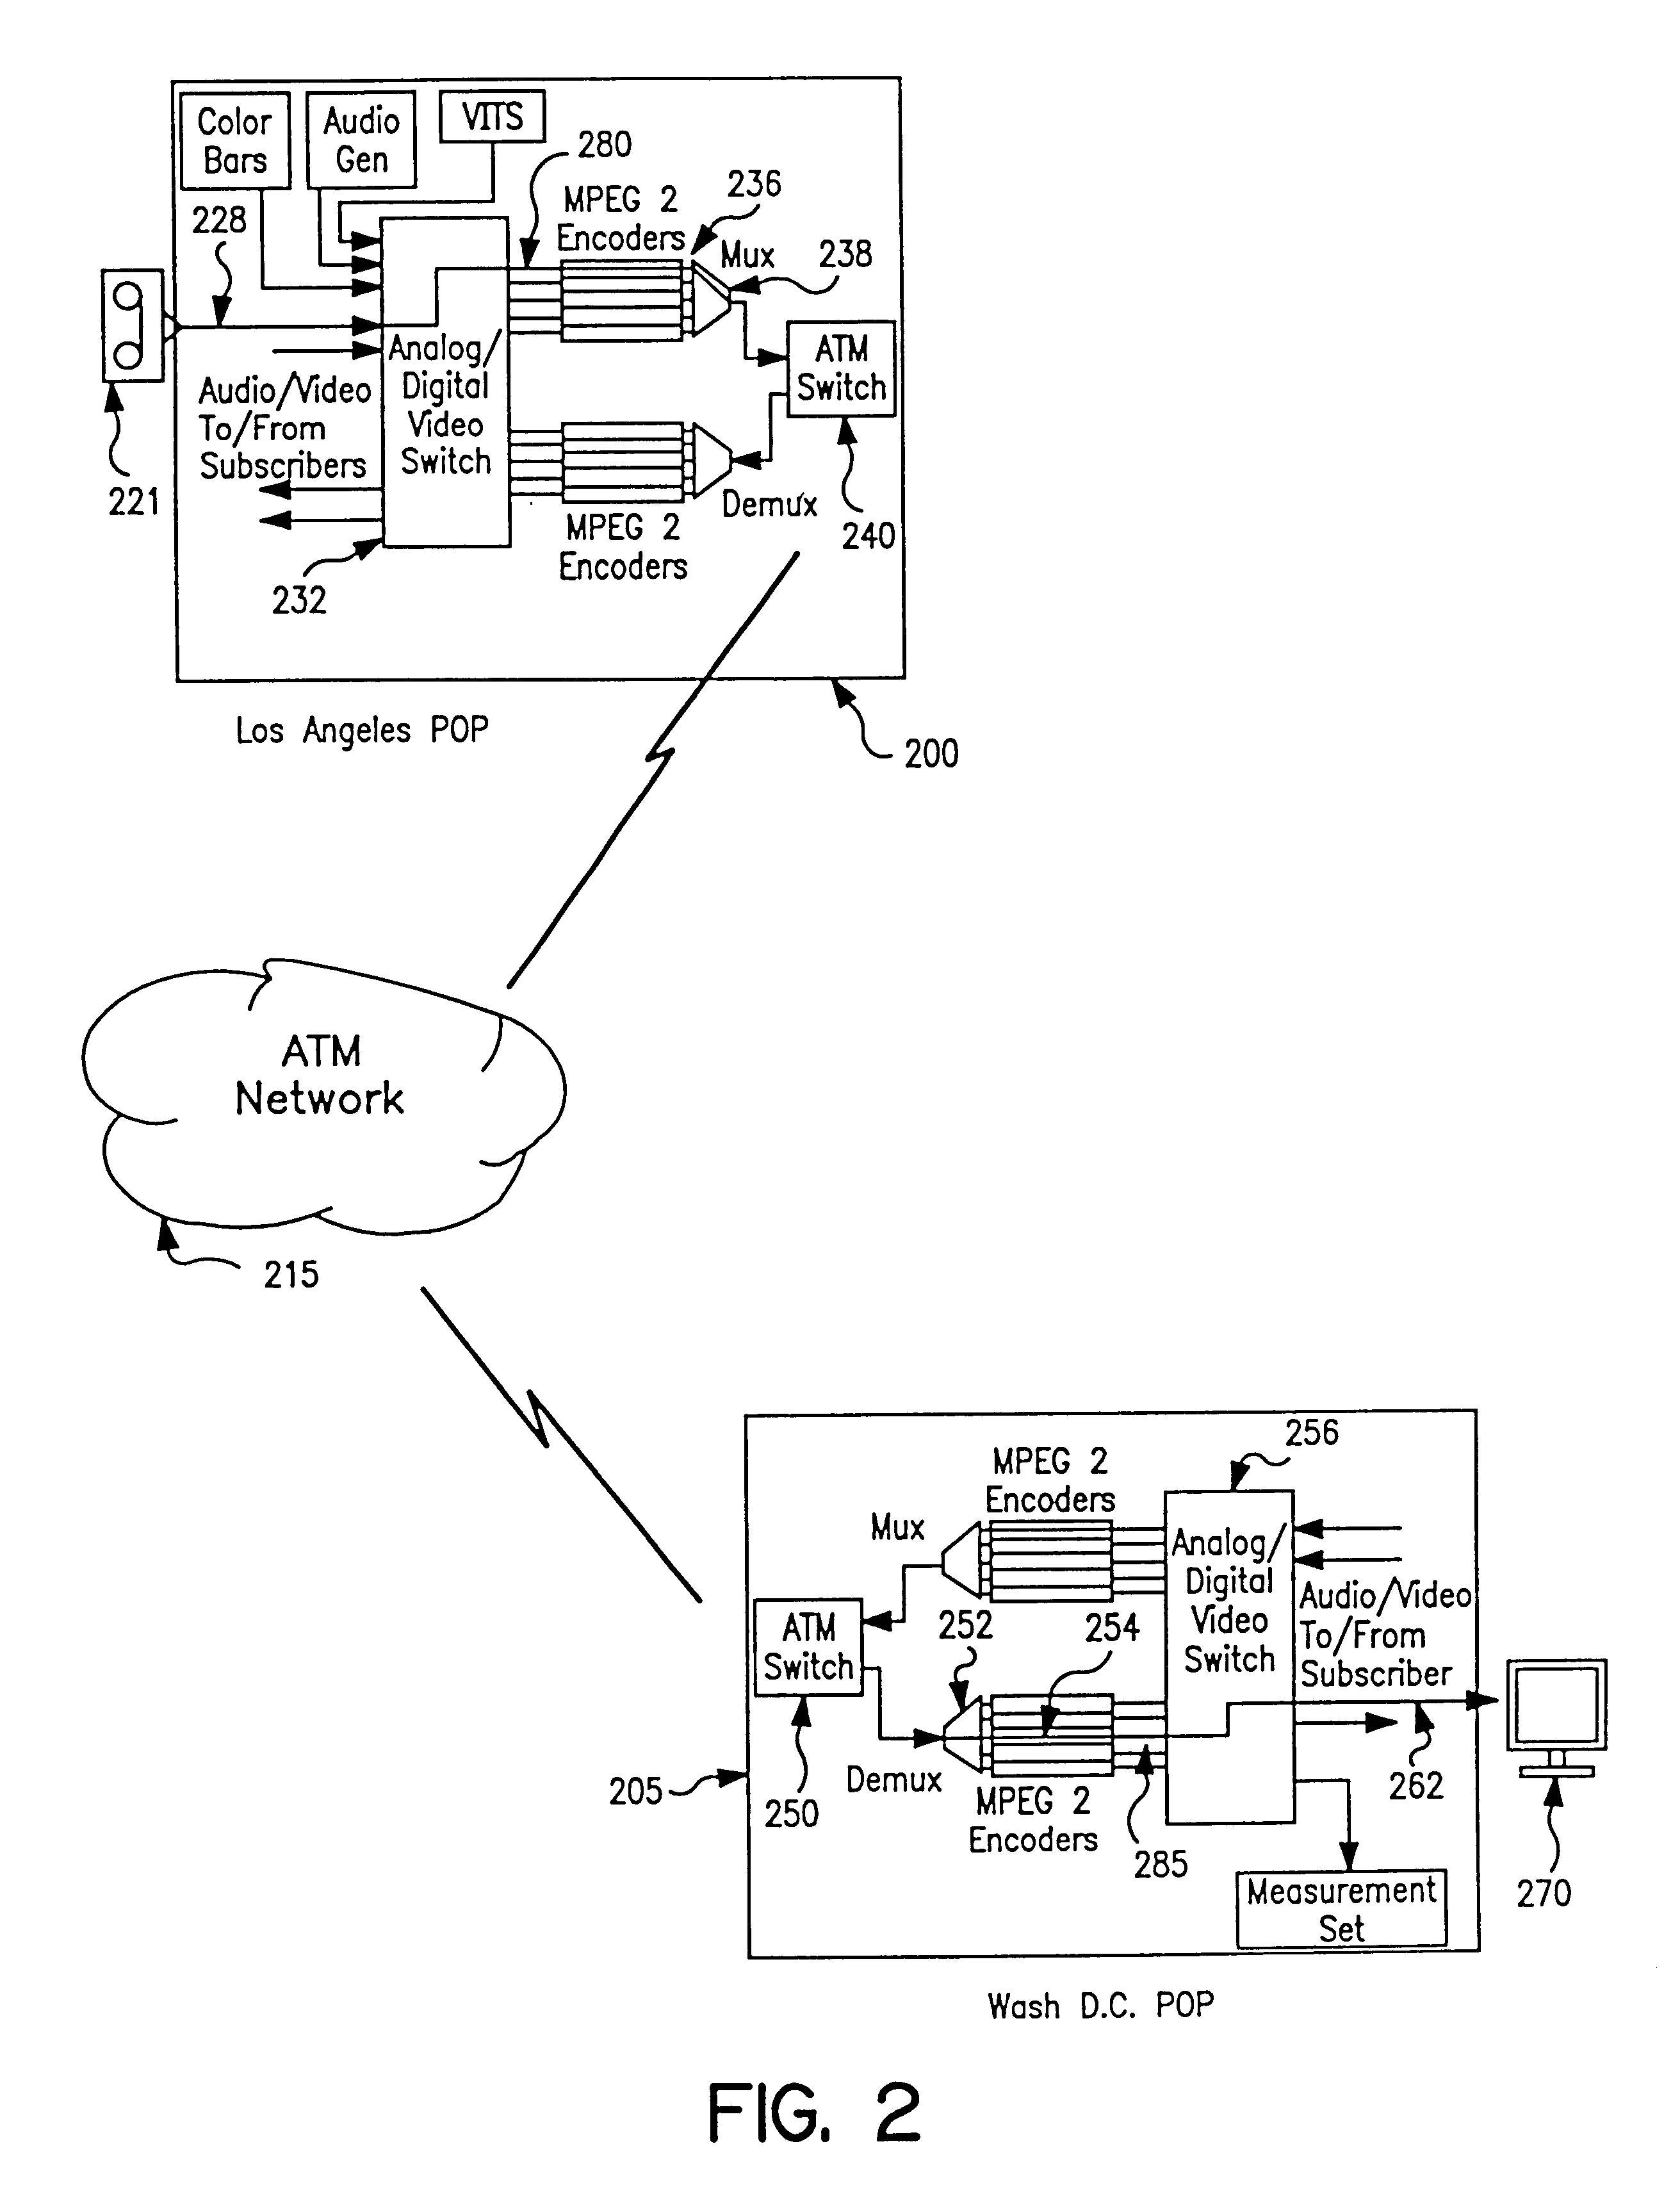 Apparatus and method of in-service audio/video synchronization testing